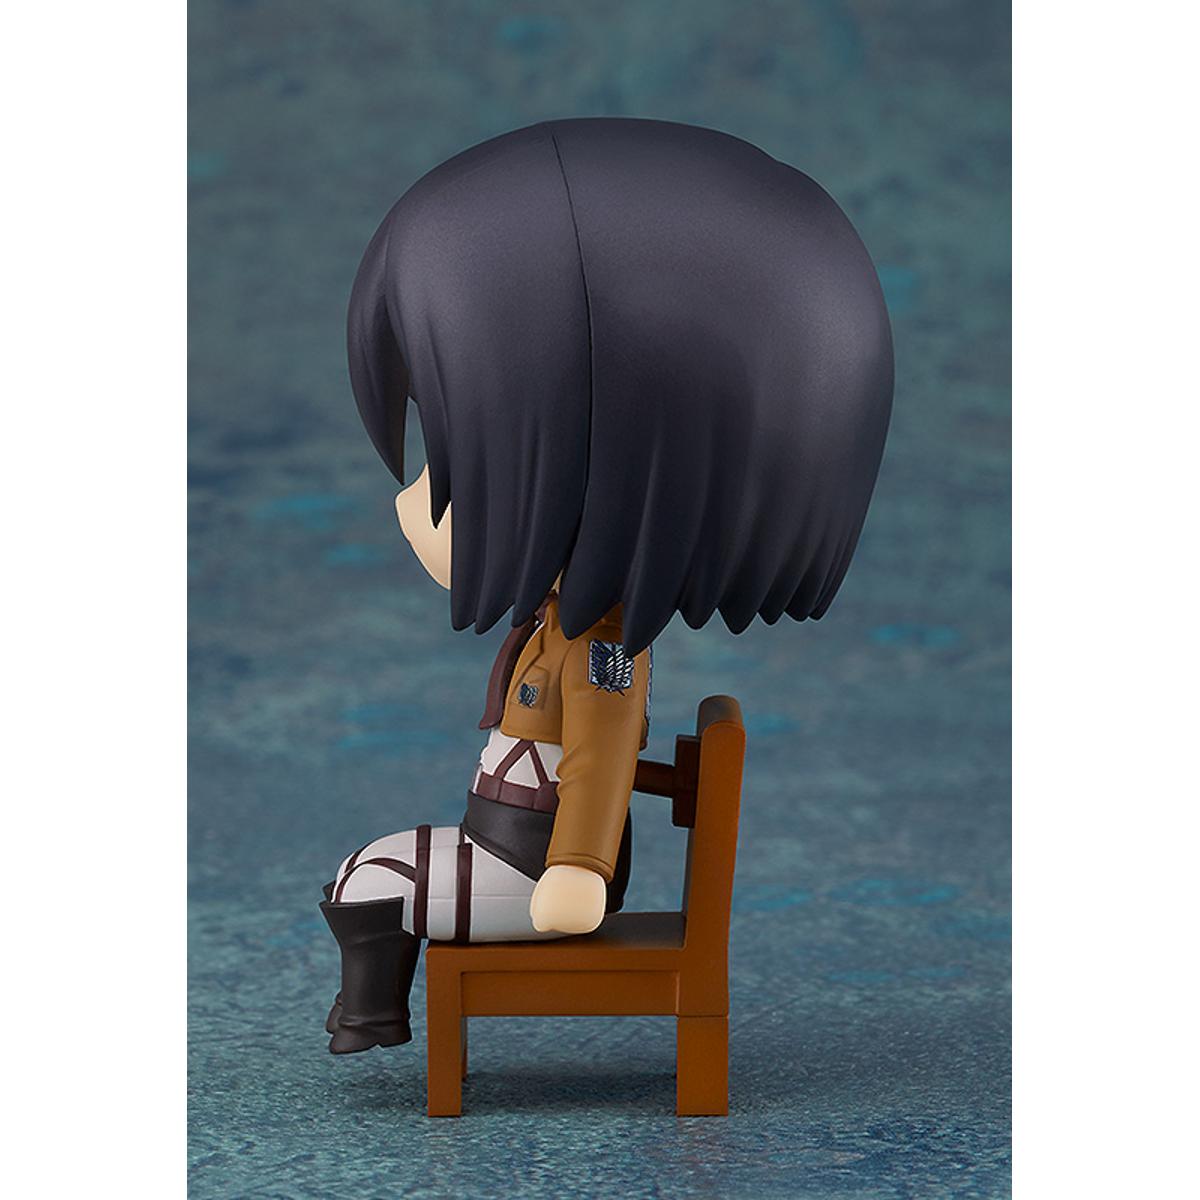 Attack On Titan Nendoroid Swacchao! &quot;Mikasa Ackerman&quot;-Good Smile Company-Ace Cards &amp; Collectibles